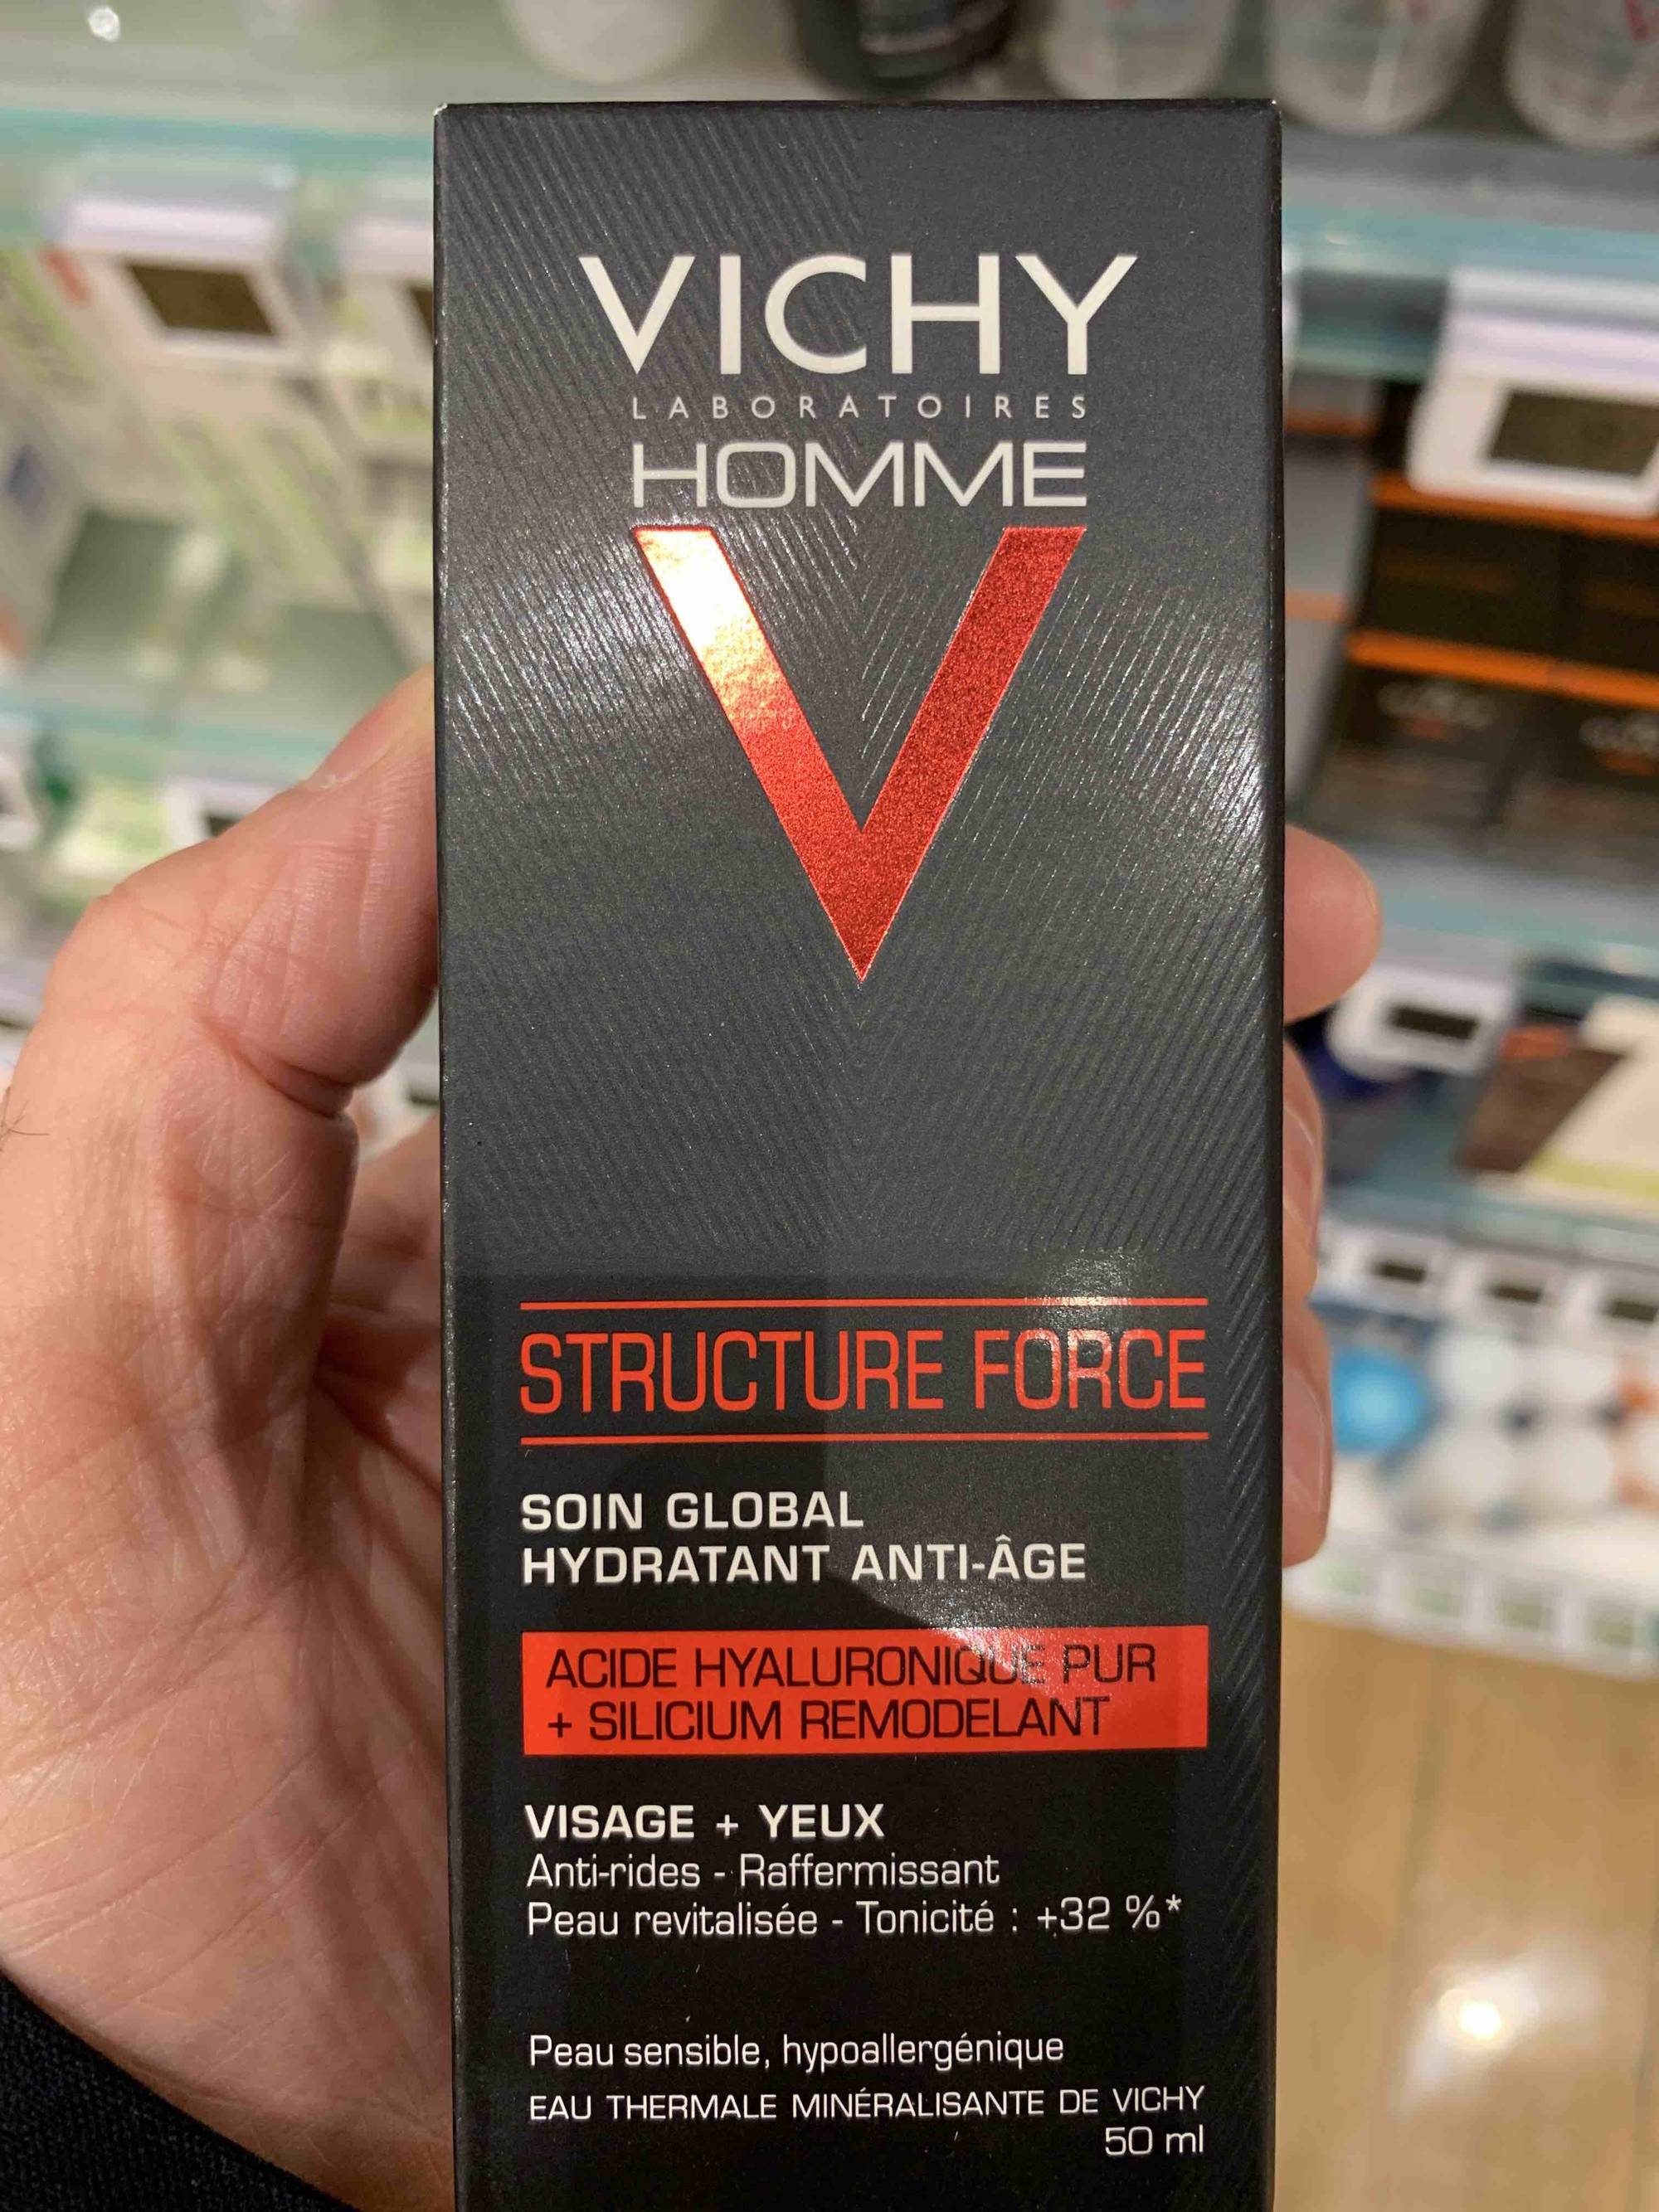 VICHY - Homme Structure force - Soin global hydratant anti-âge